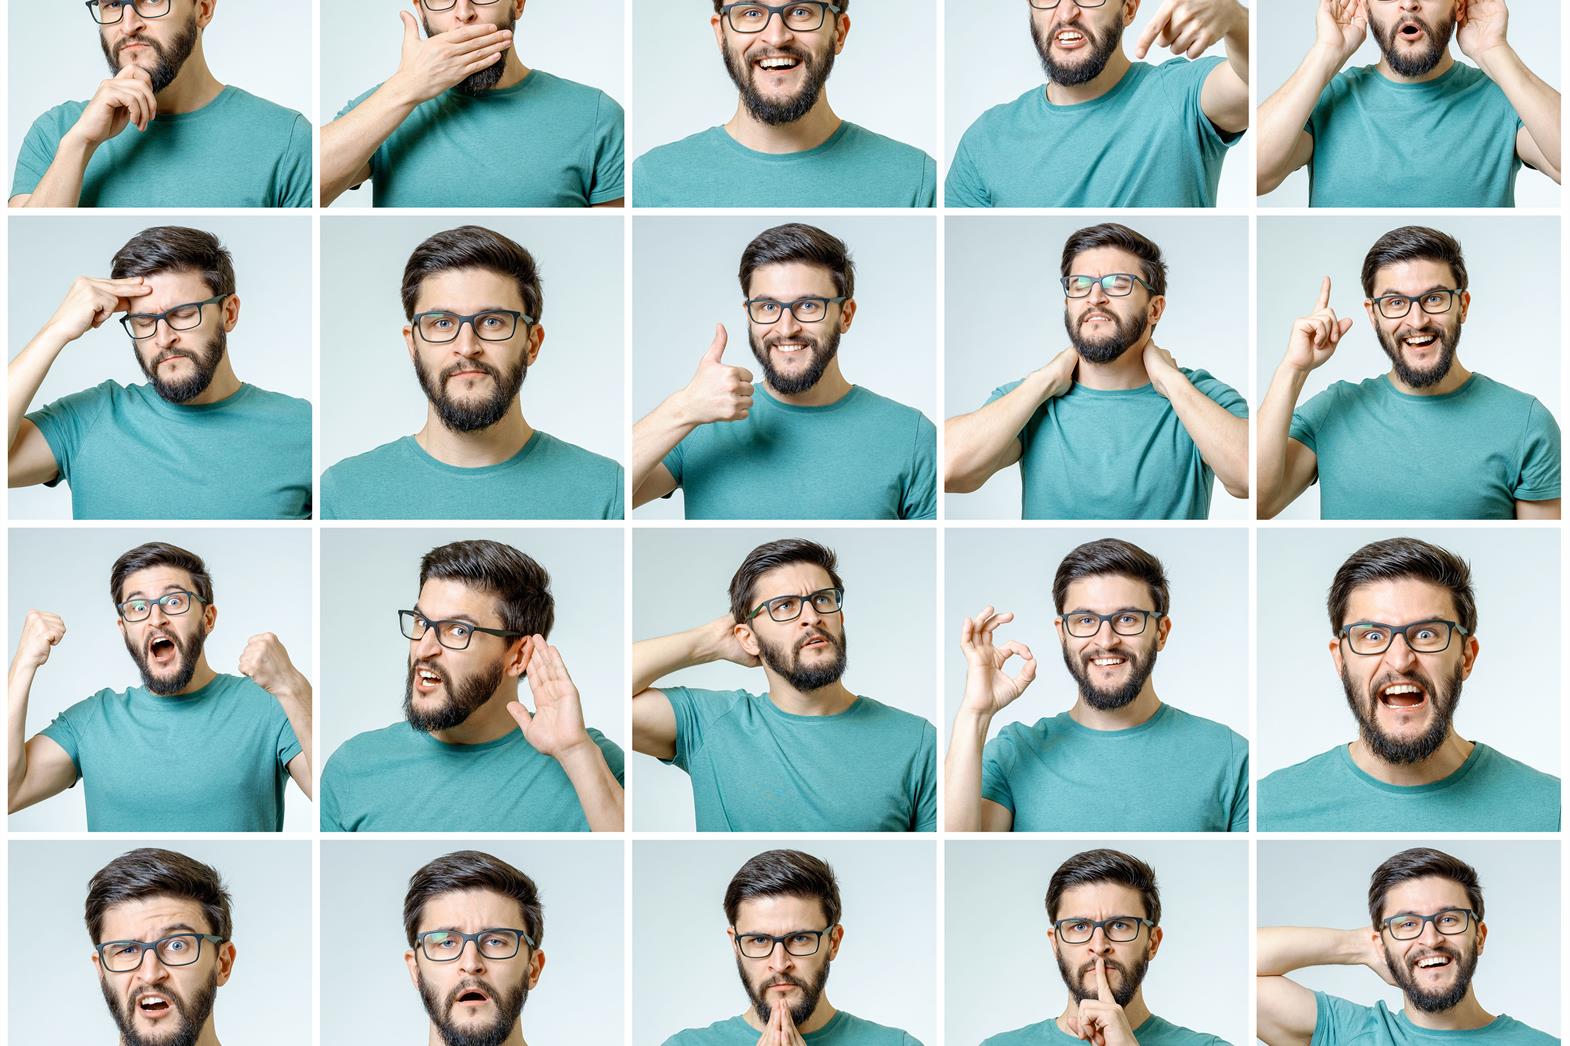 Several images of a man making different facial expressions.